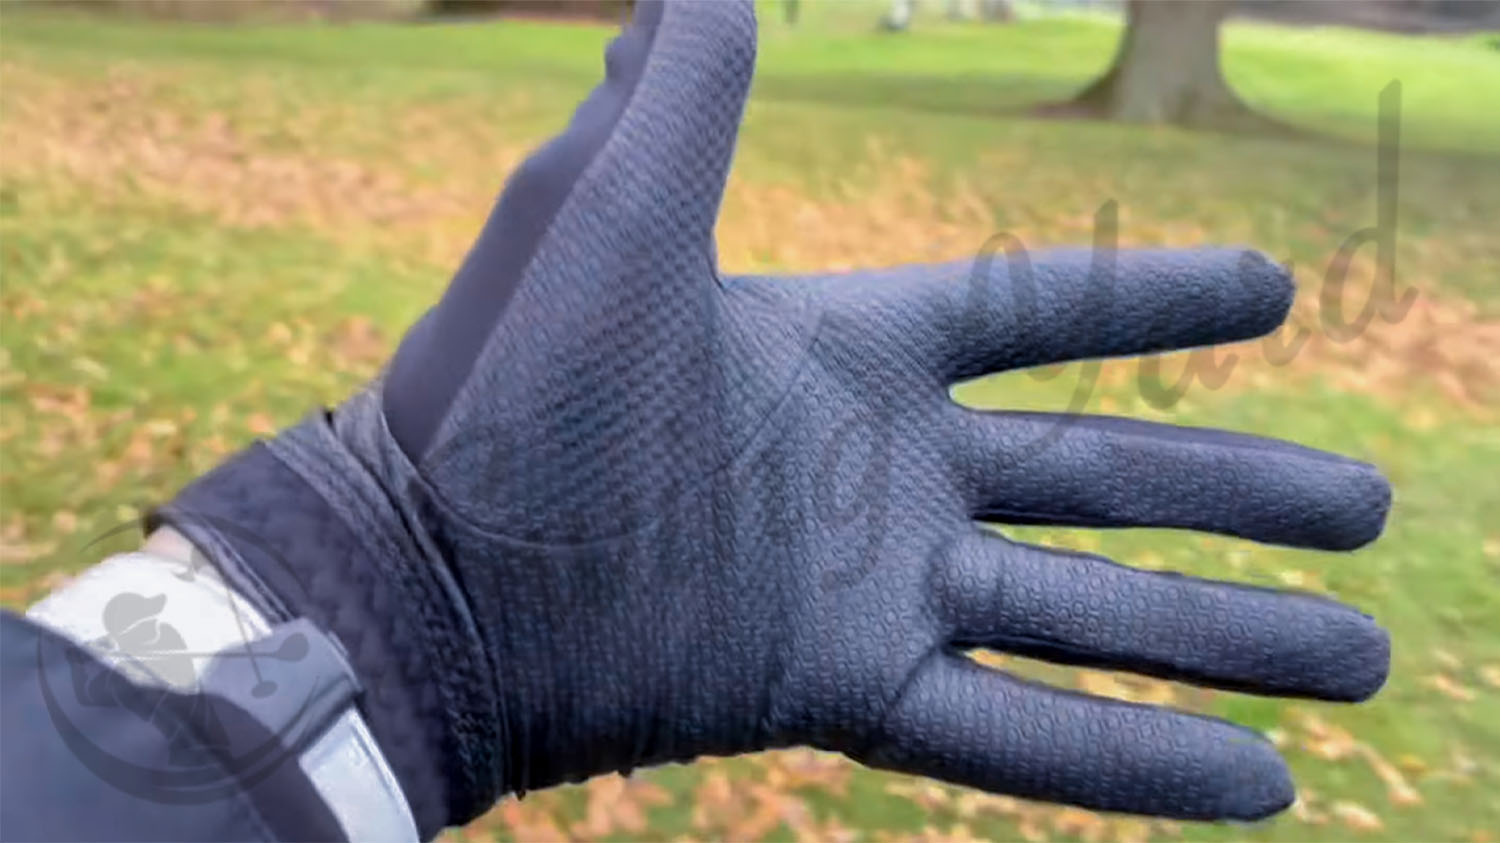 Me testing a Callaway Thermal Grip gloves at the golf course